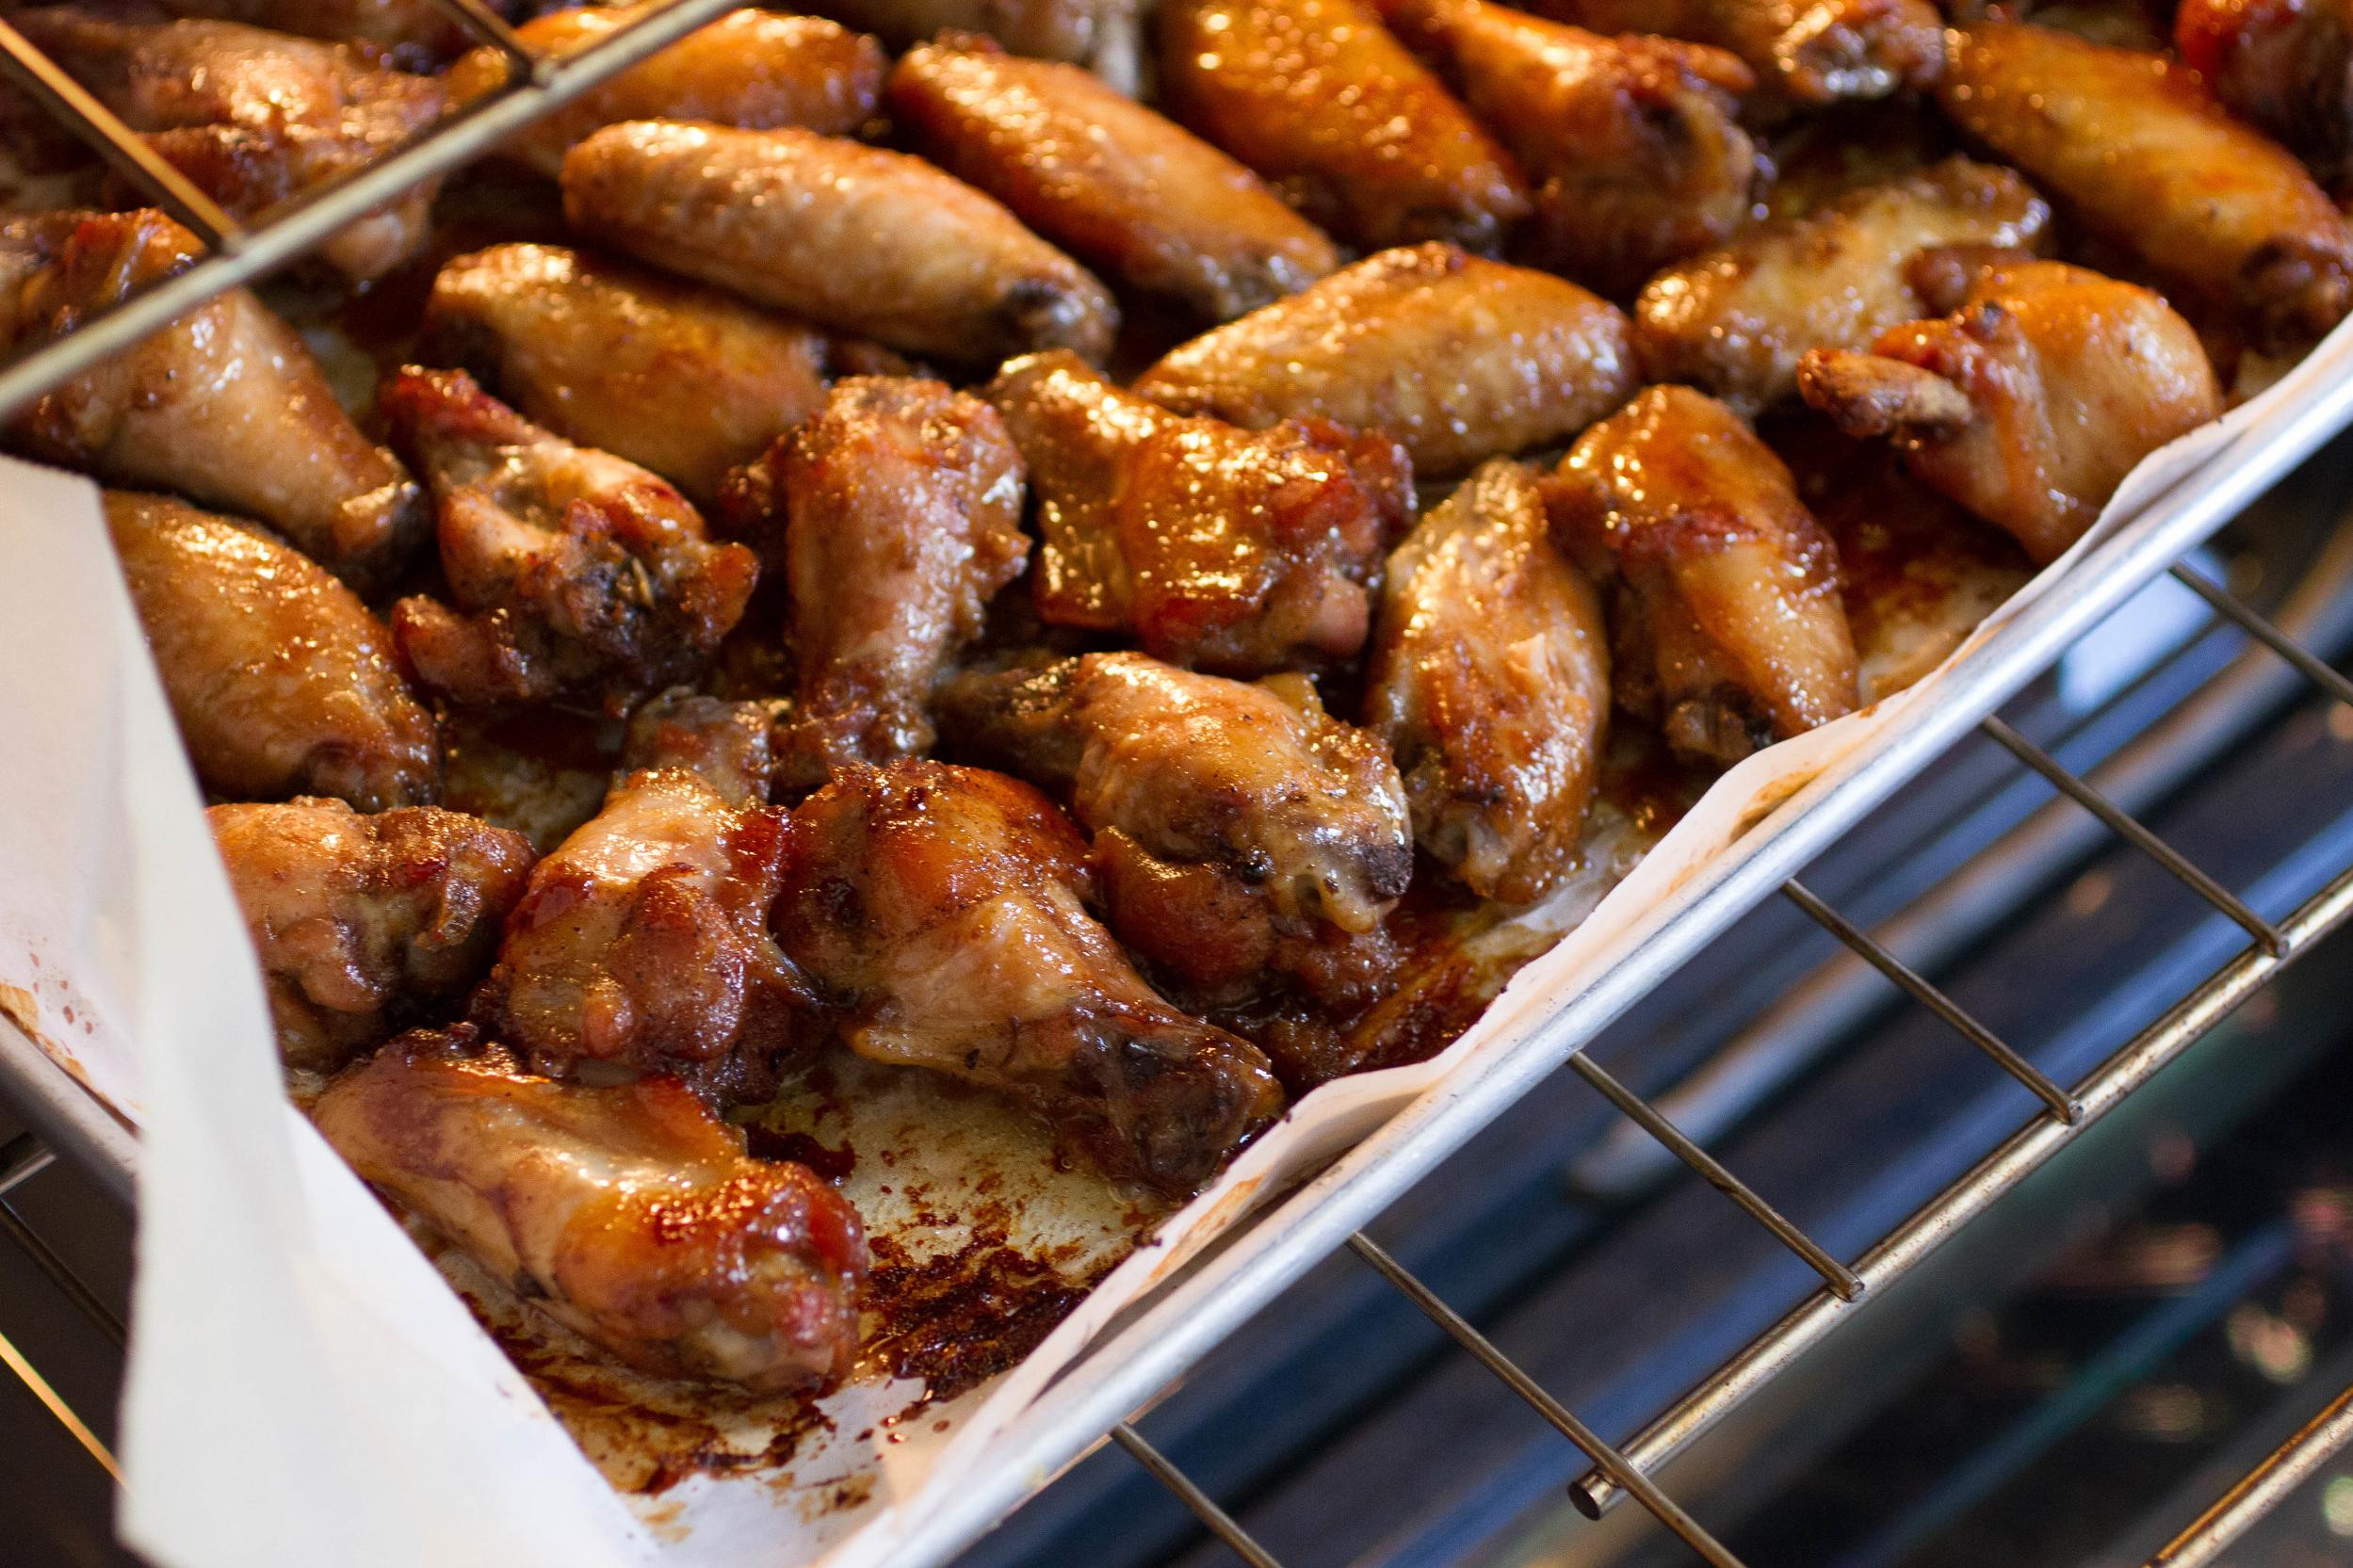  These savory wings are perfect for game day or simply as a tasty appetizer.